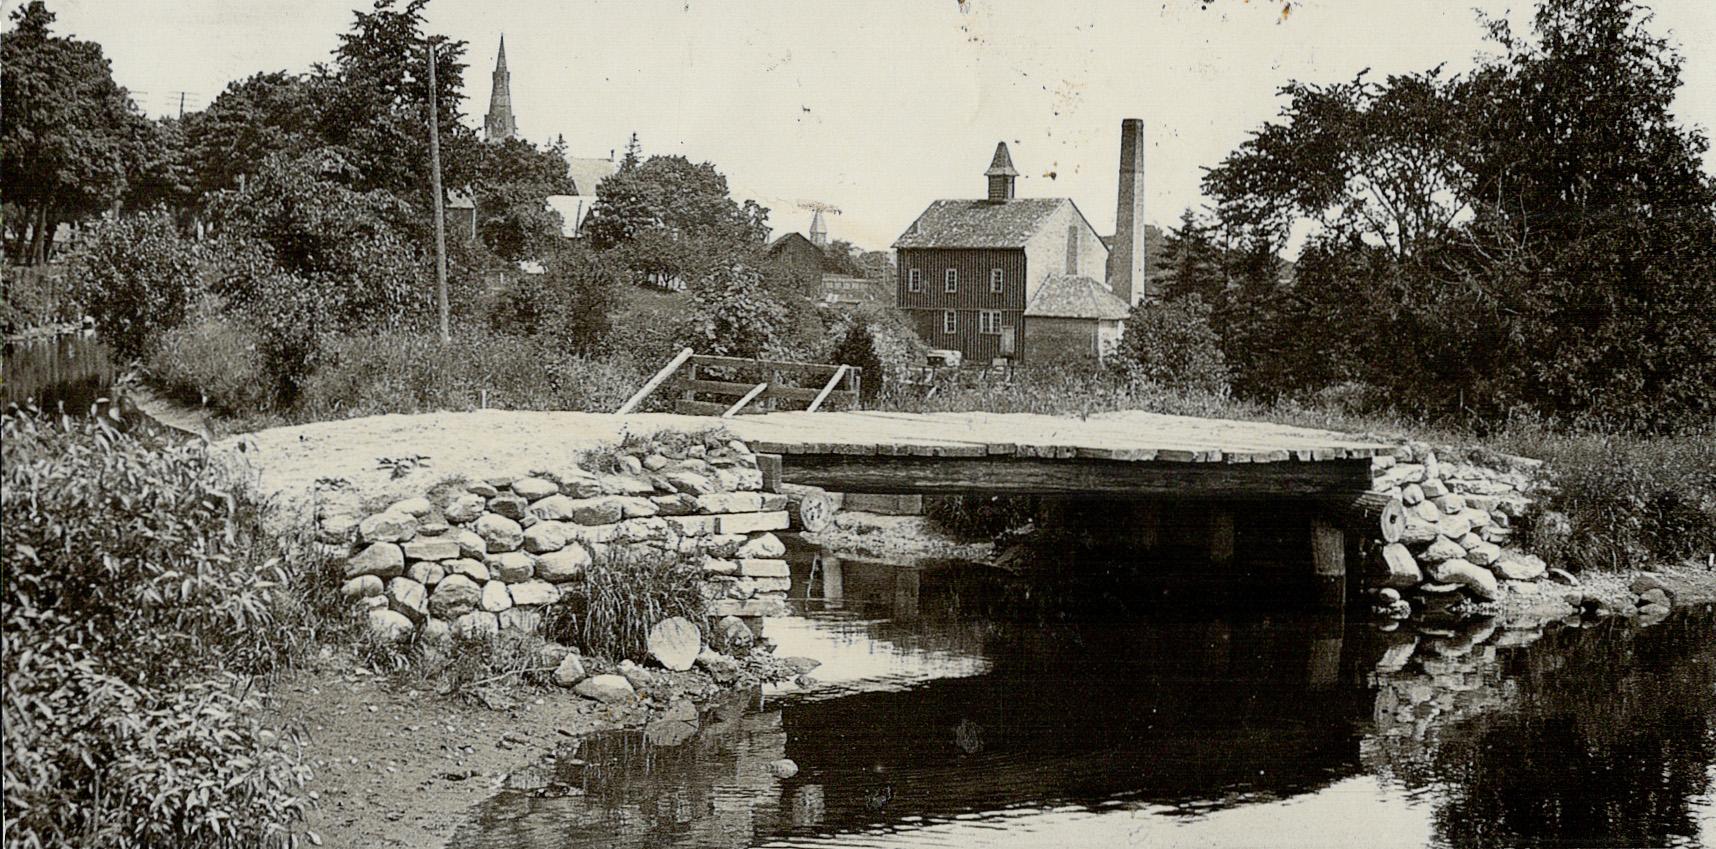 Uxbridge Ont., is prettily situated in the centre of a fine farming Ontario. A little stream runs through its centre and formerly supplied power to saw and grist mills